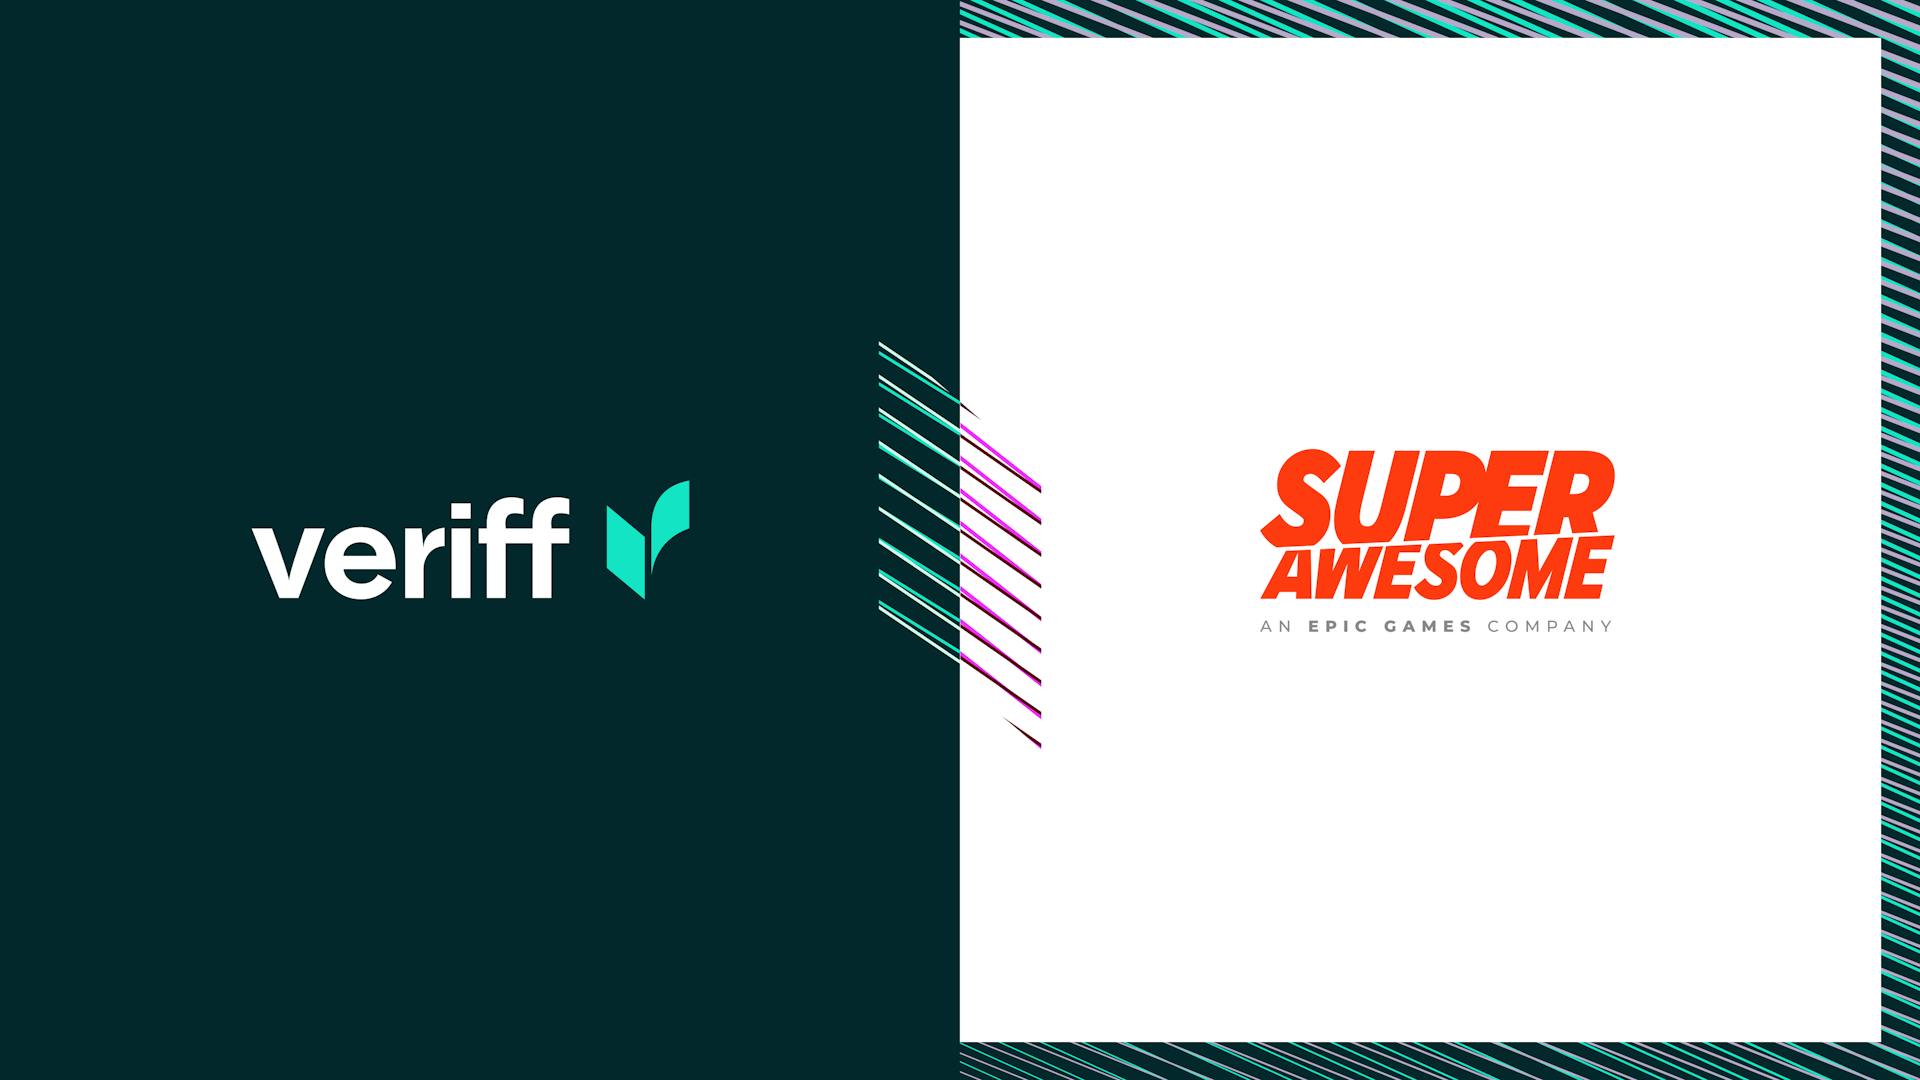 Veriff partners with SuperAwesome